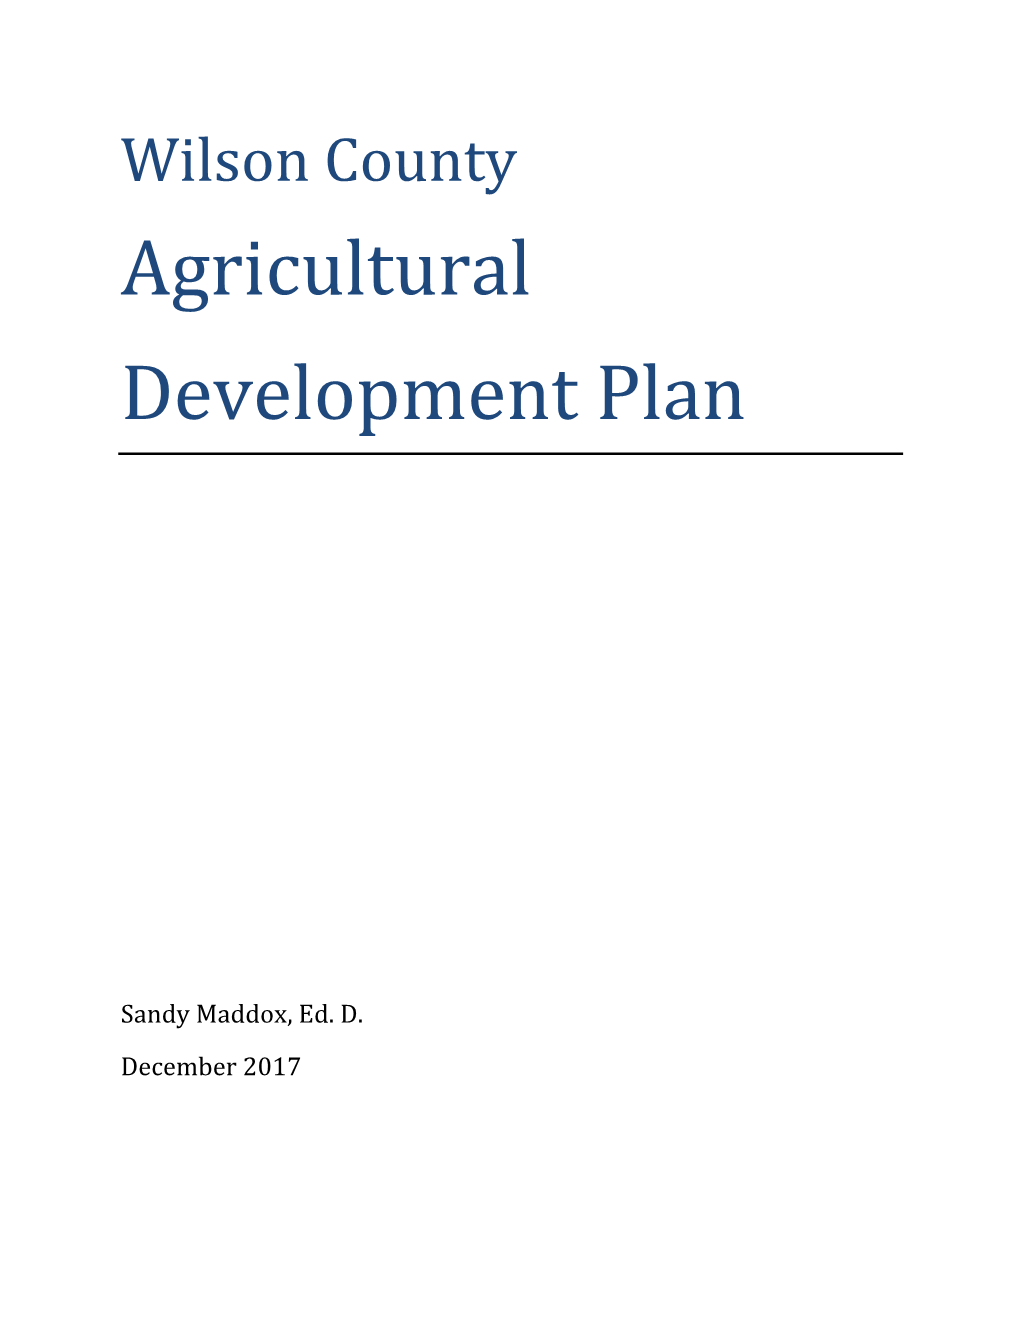 Wilson County, NC Agricultural Development Plan